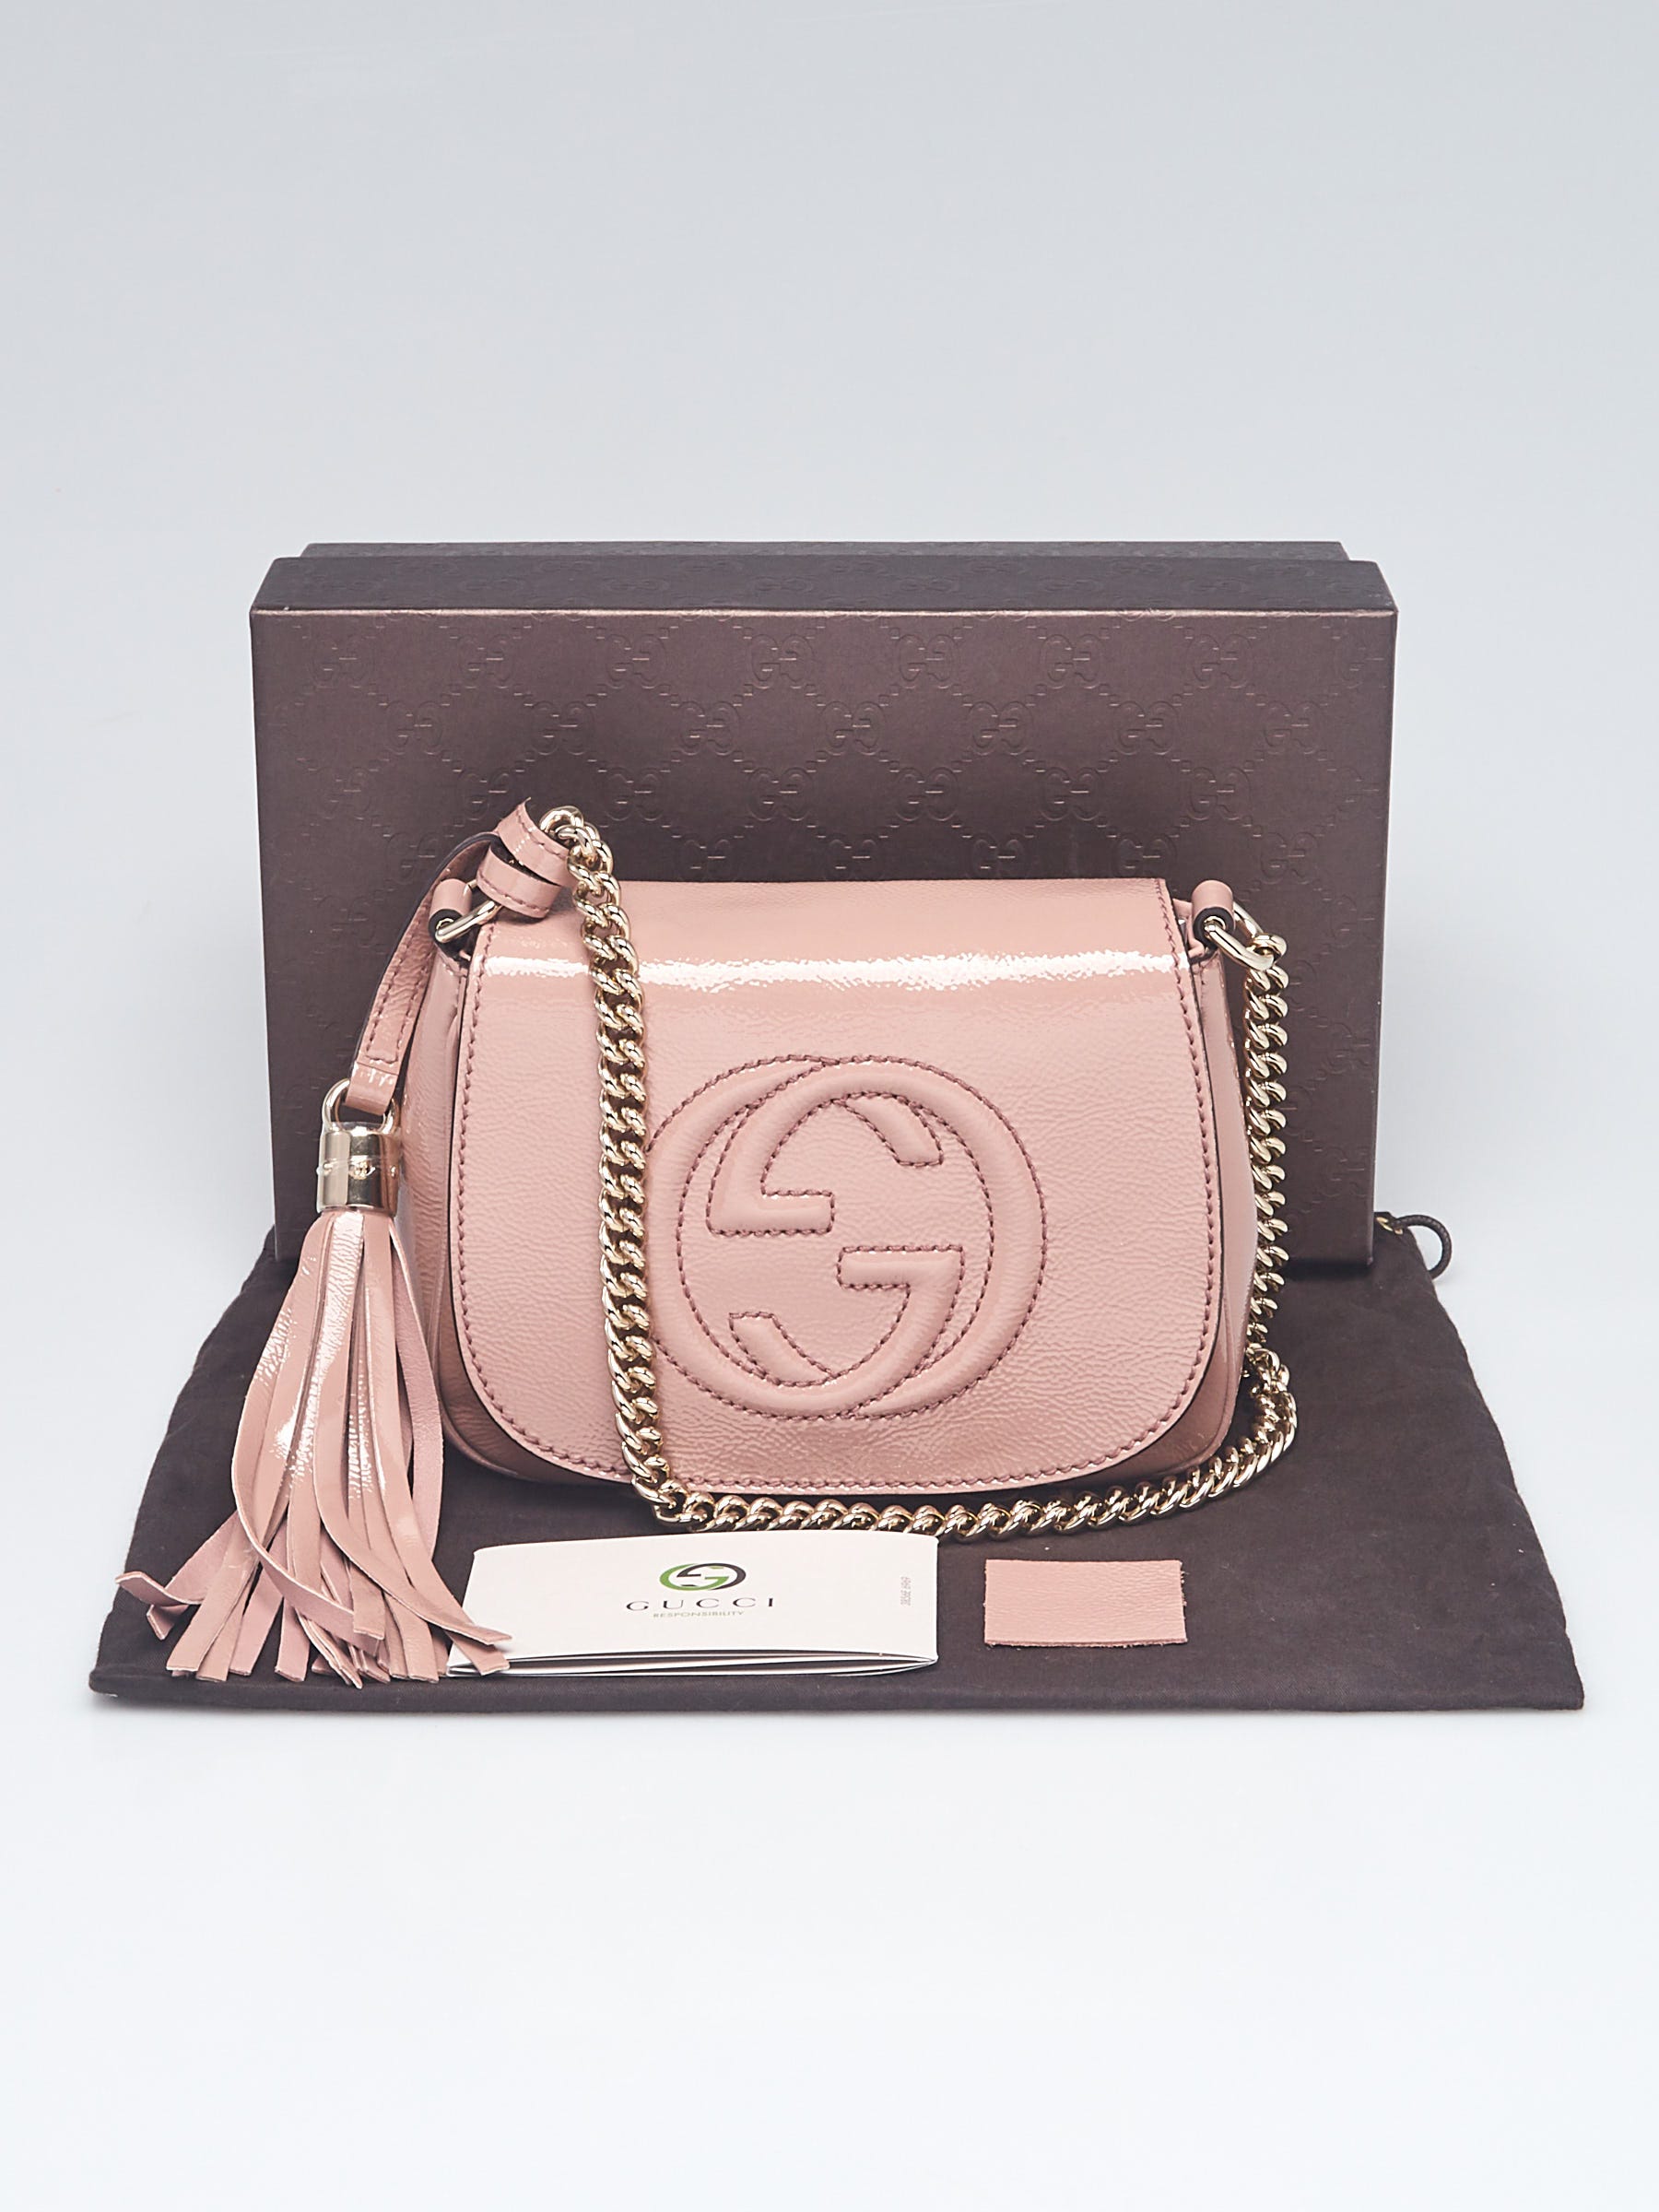 Gucci - Soho Blush Patent Leather Front Flap Chain Bag